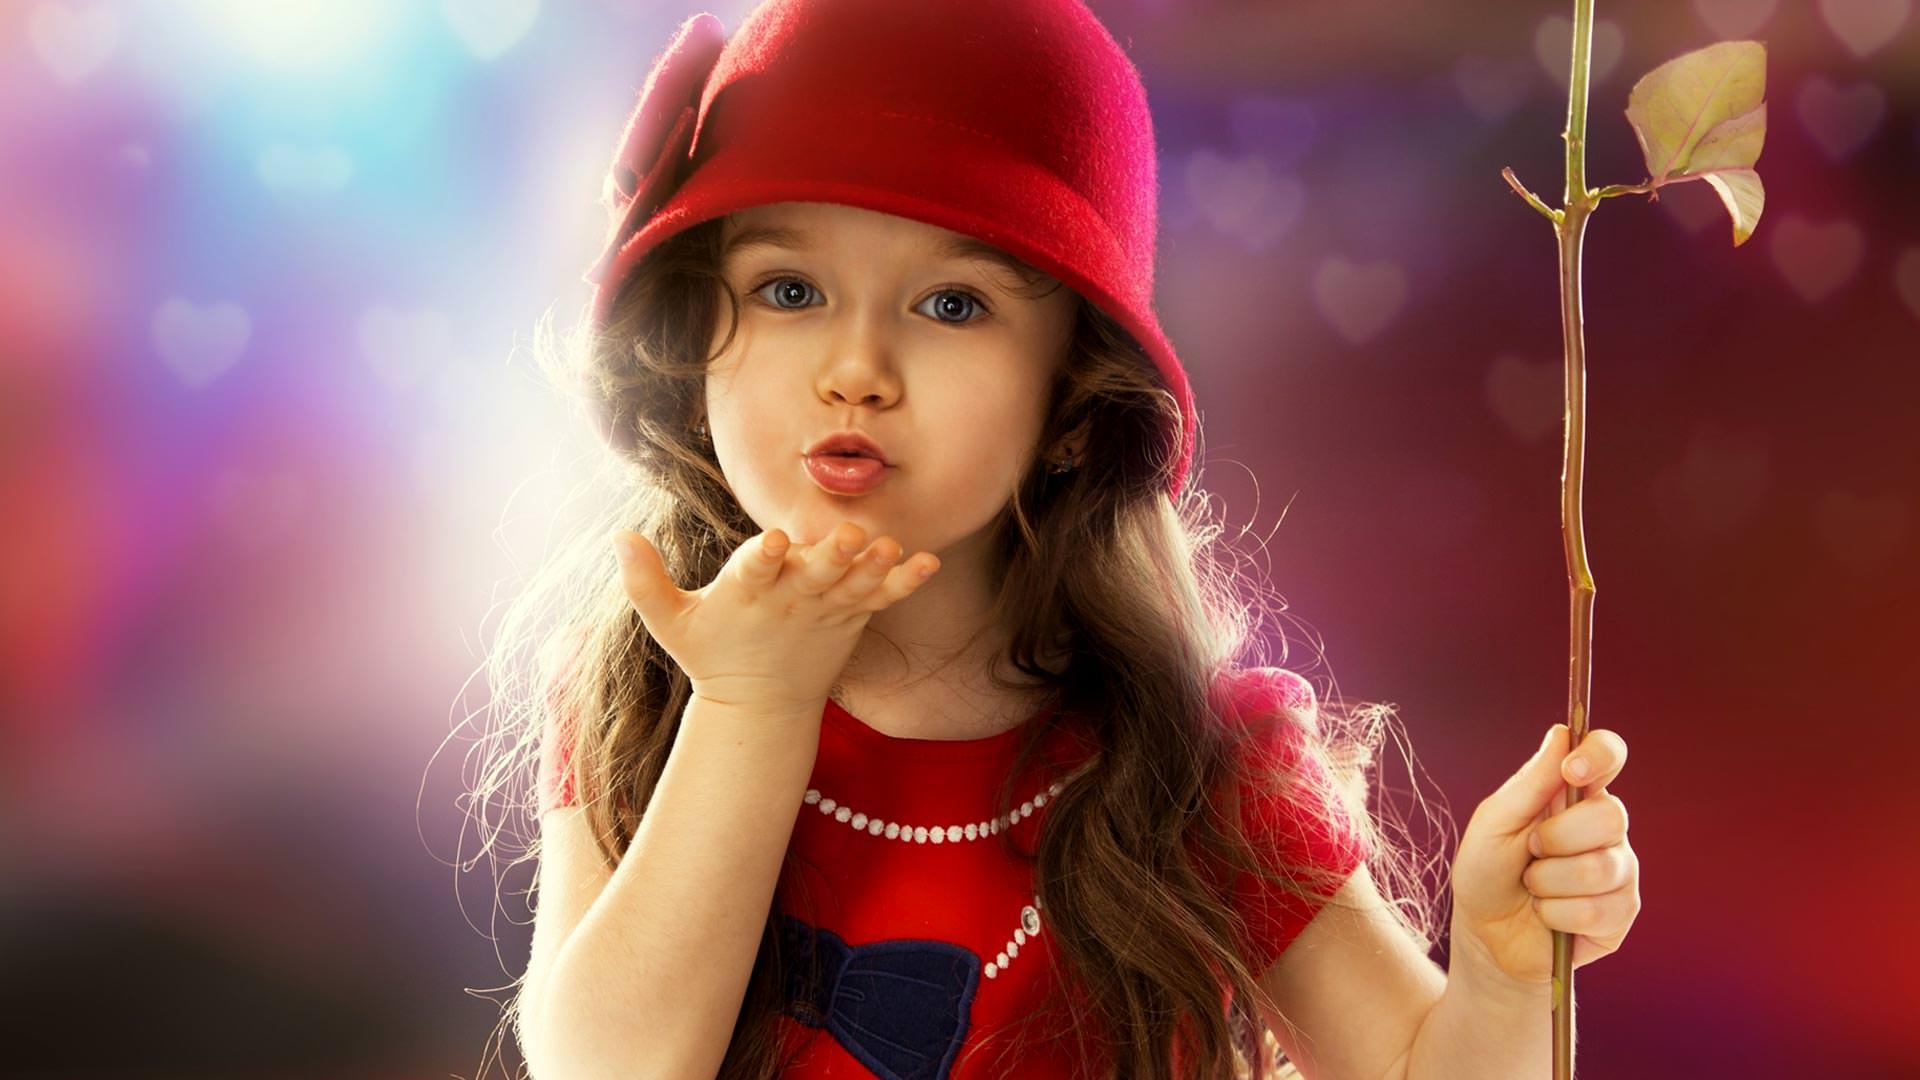 Baby HD Wallpapers - Top Free Baby HD Backgrounds ...